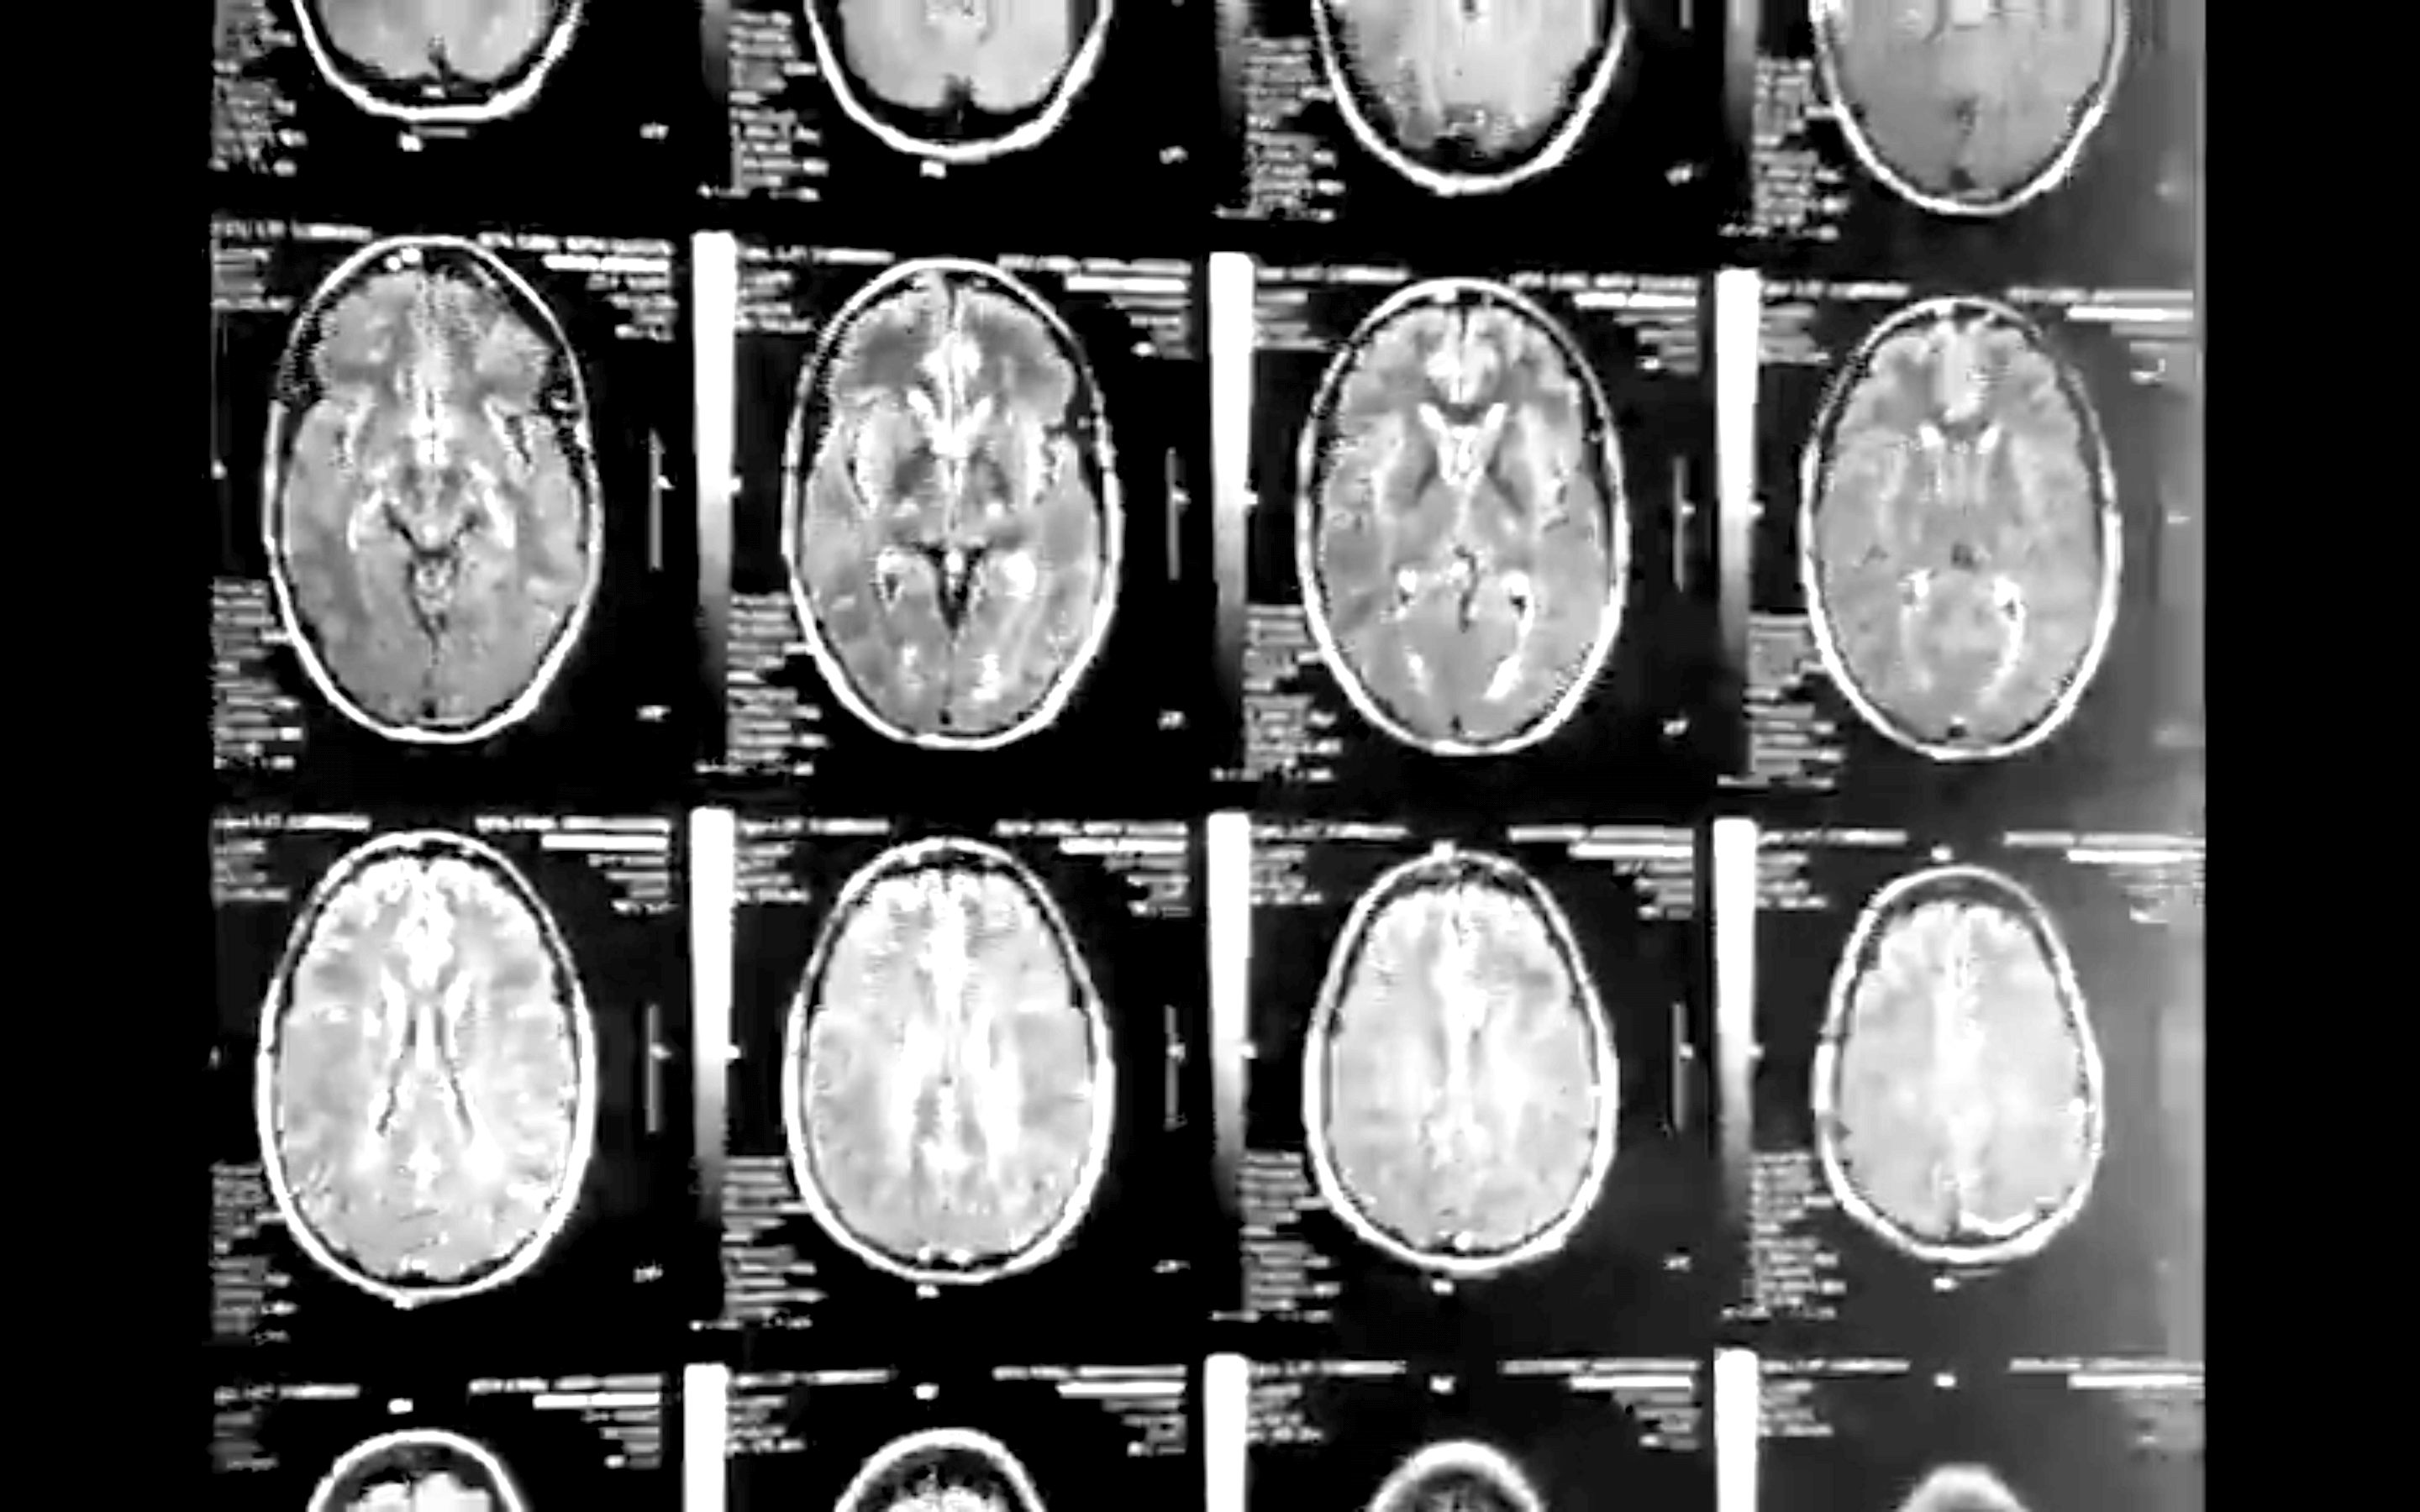 Brain scan images